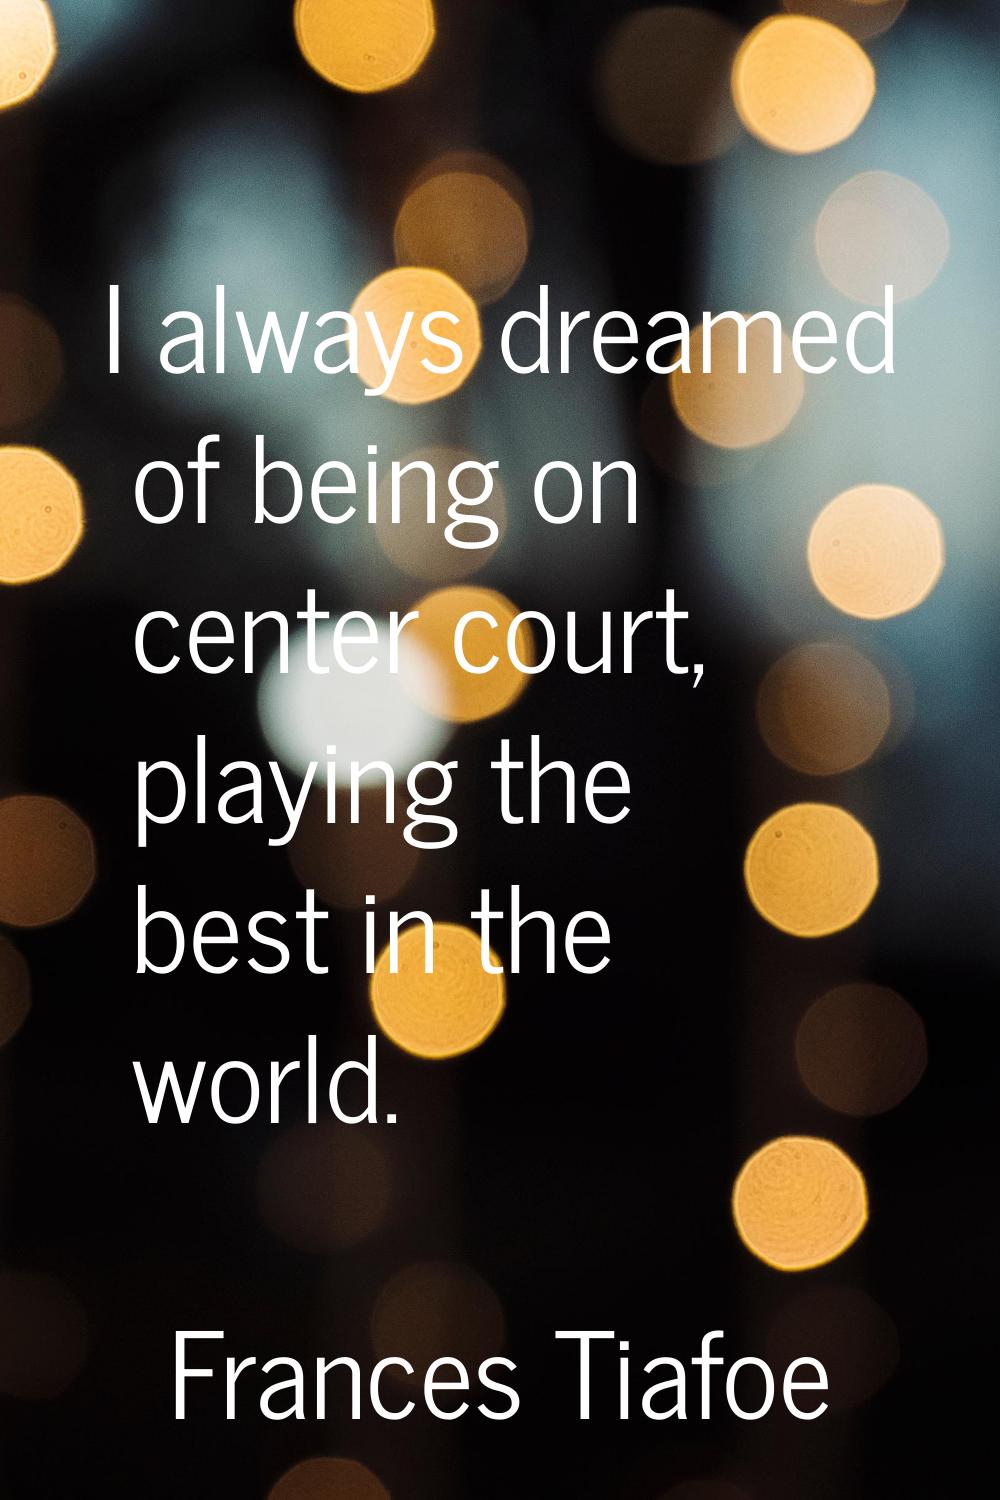 I always dreamed of being on center court, playing the best in the world.